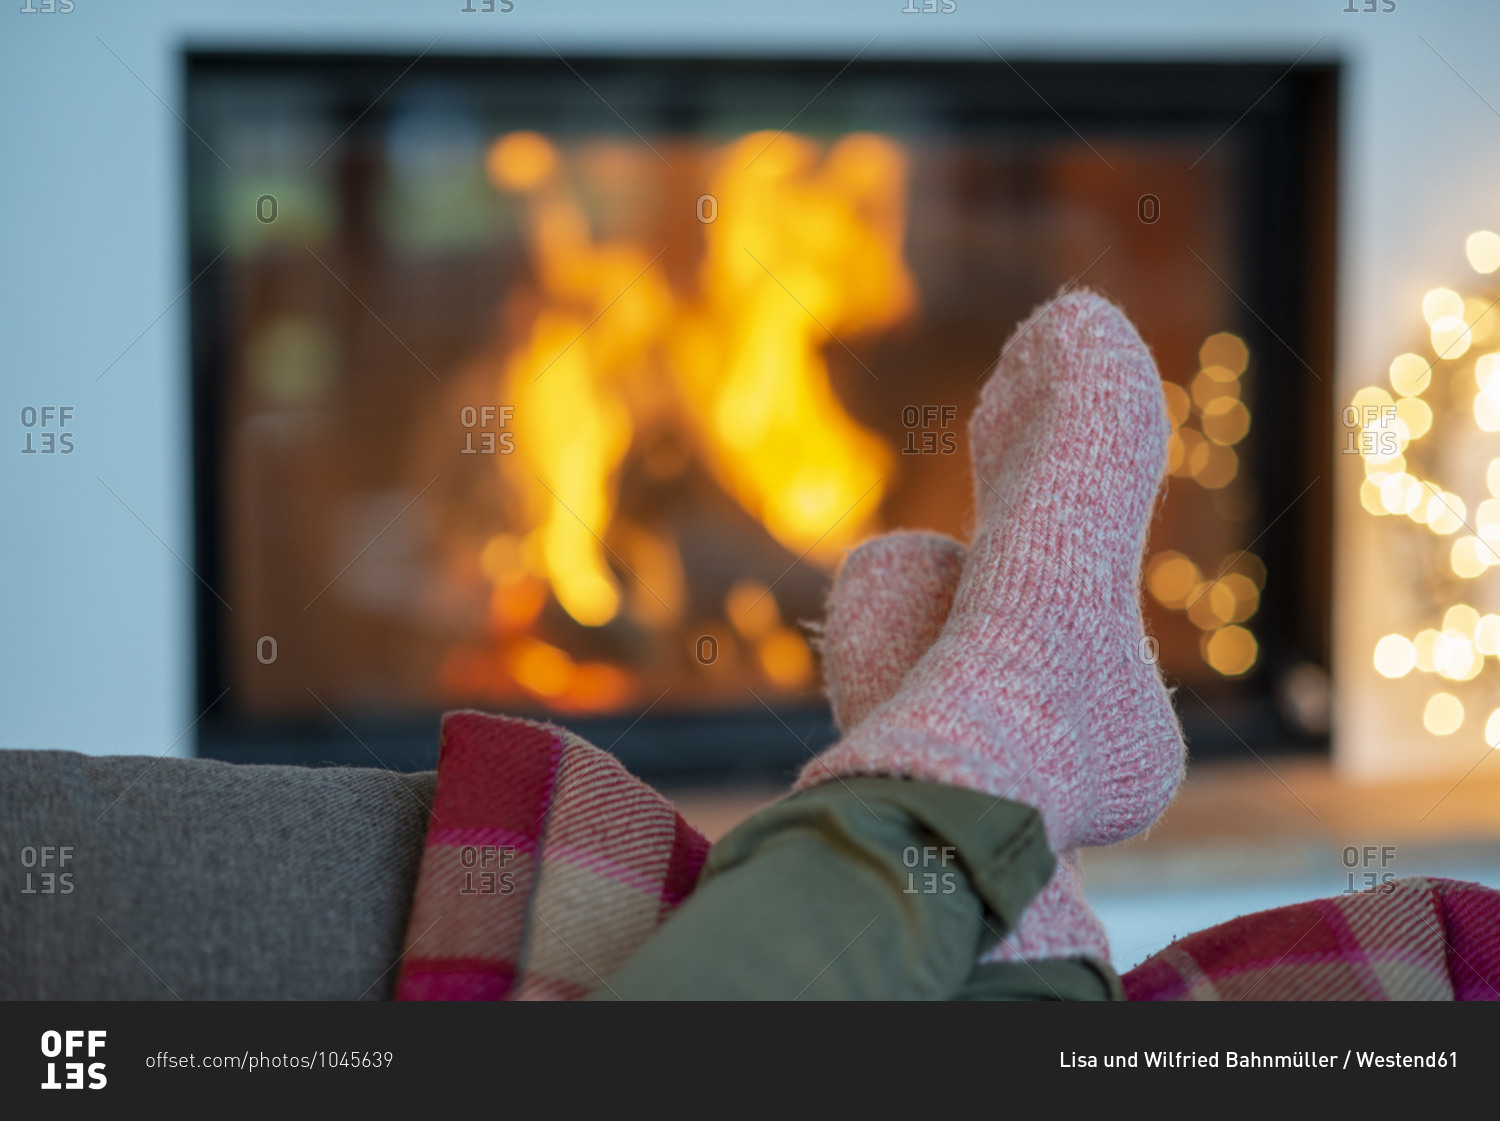 Legs of young woman wearing socks relaxing against fireplace at home